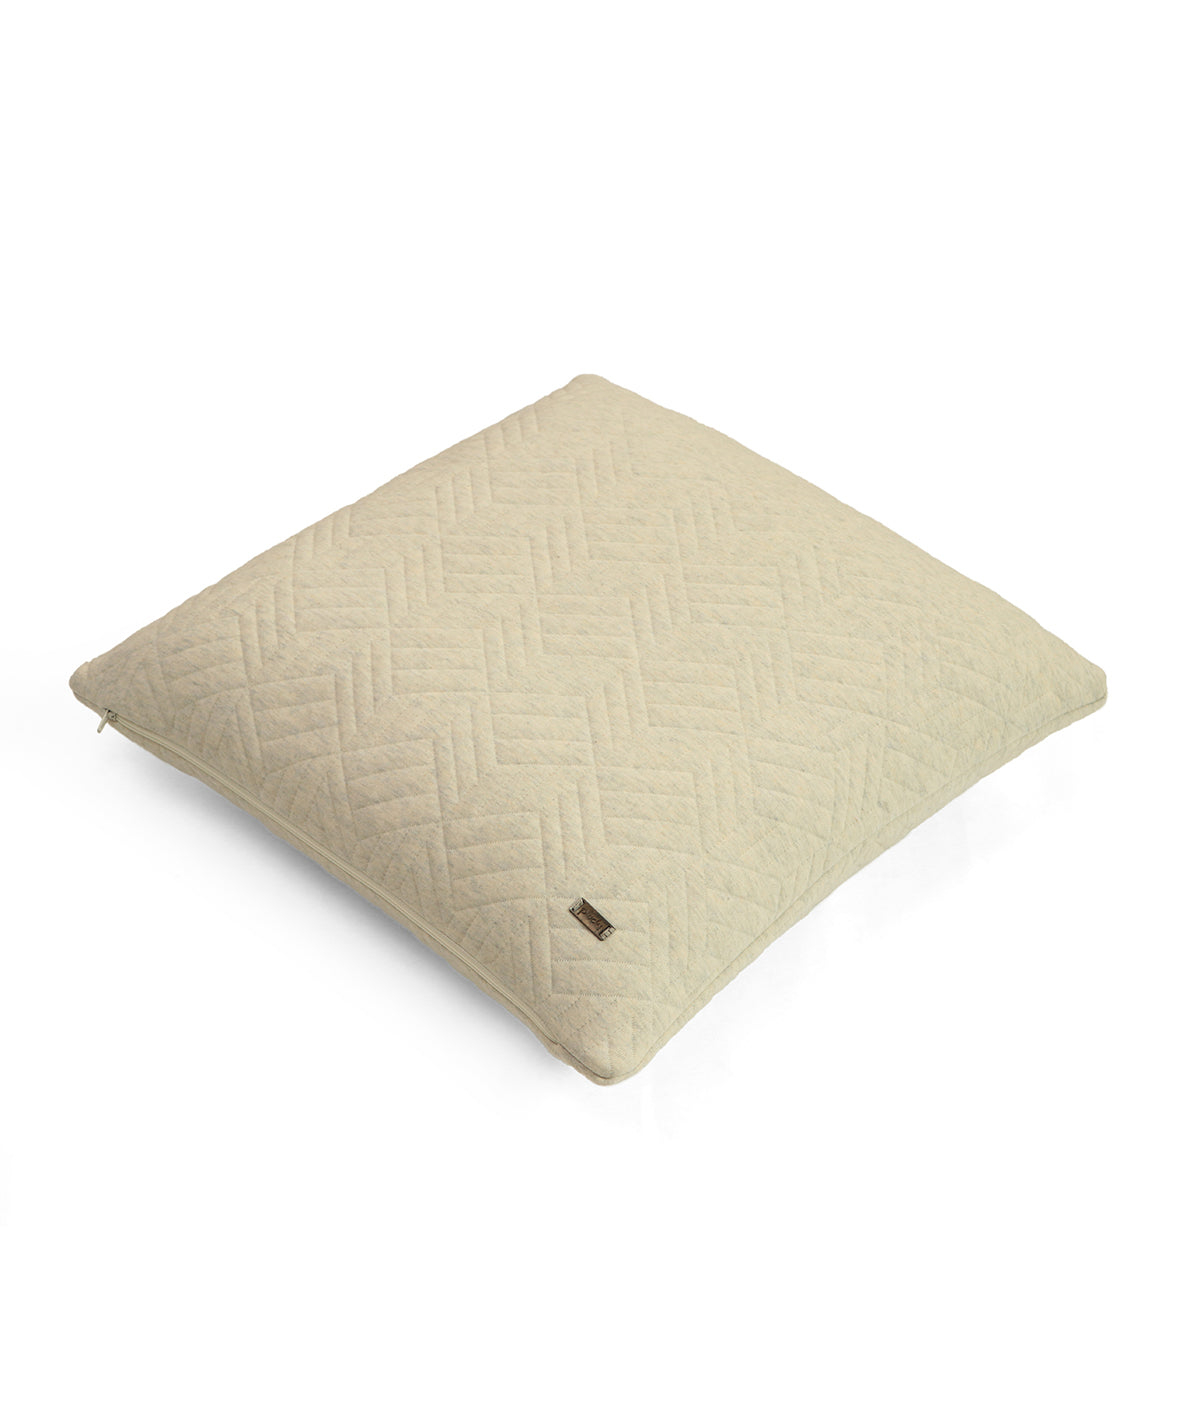 3 D Cubic Natural Mel. & Ryegrass Cotton Knitted Quilted Decorative 18 X 18 Inches Cushion Cover